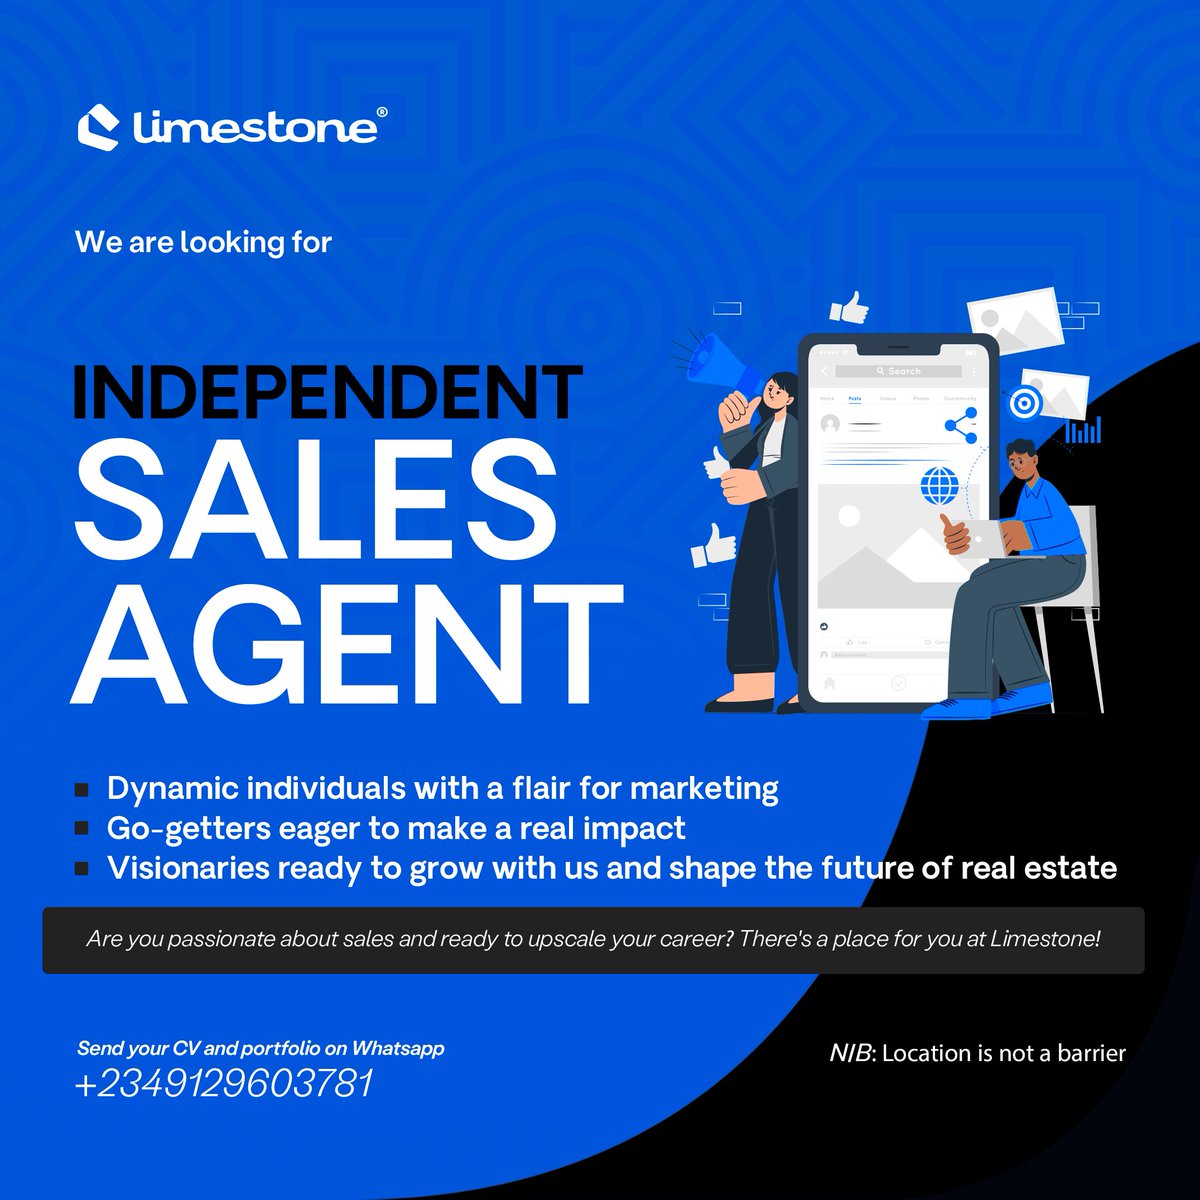 Are you passionate about sales and ready to upscale your career? There's a place for you at Limestone!

Apply now with this Link.
forms.gle/ig8kmcWg8wTGpu…

#realestatemarketing #makemoney #SalesOpportunity #CareerGrowth #MarketingPros #GoGetters #RealEstateCareer 
Lekki Phase 1